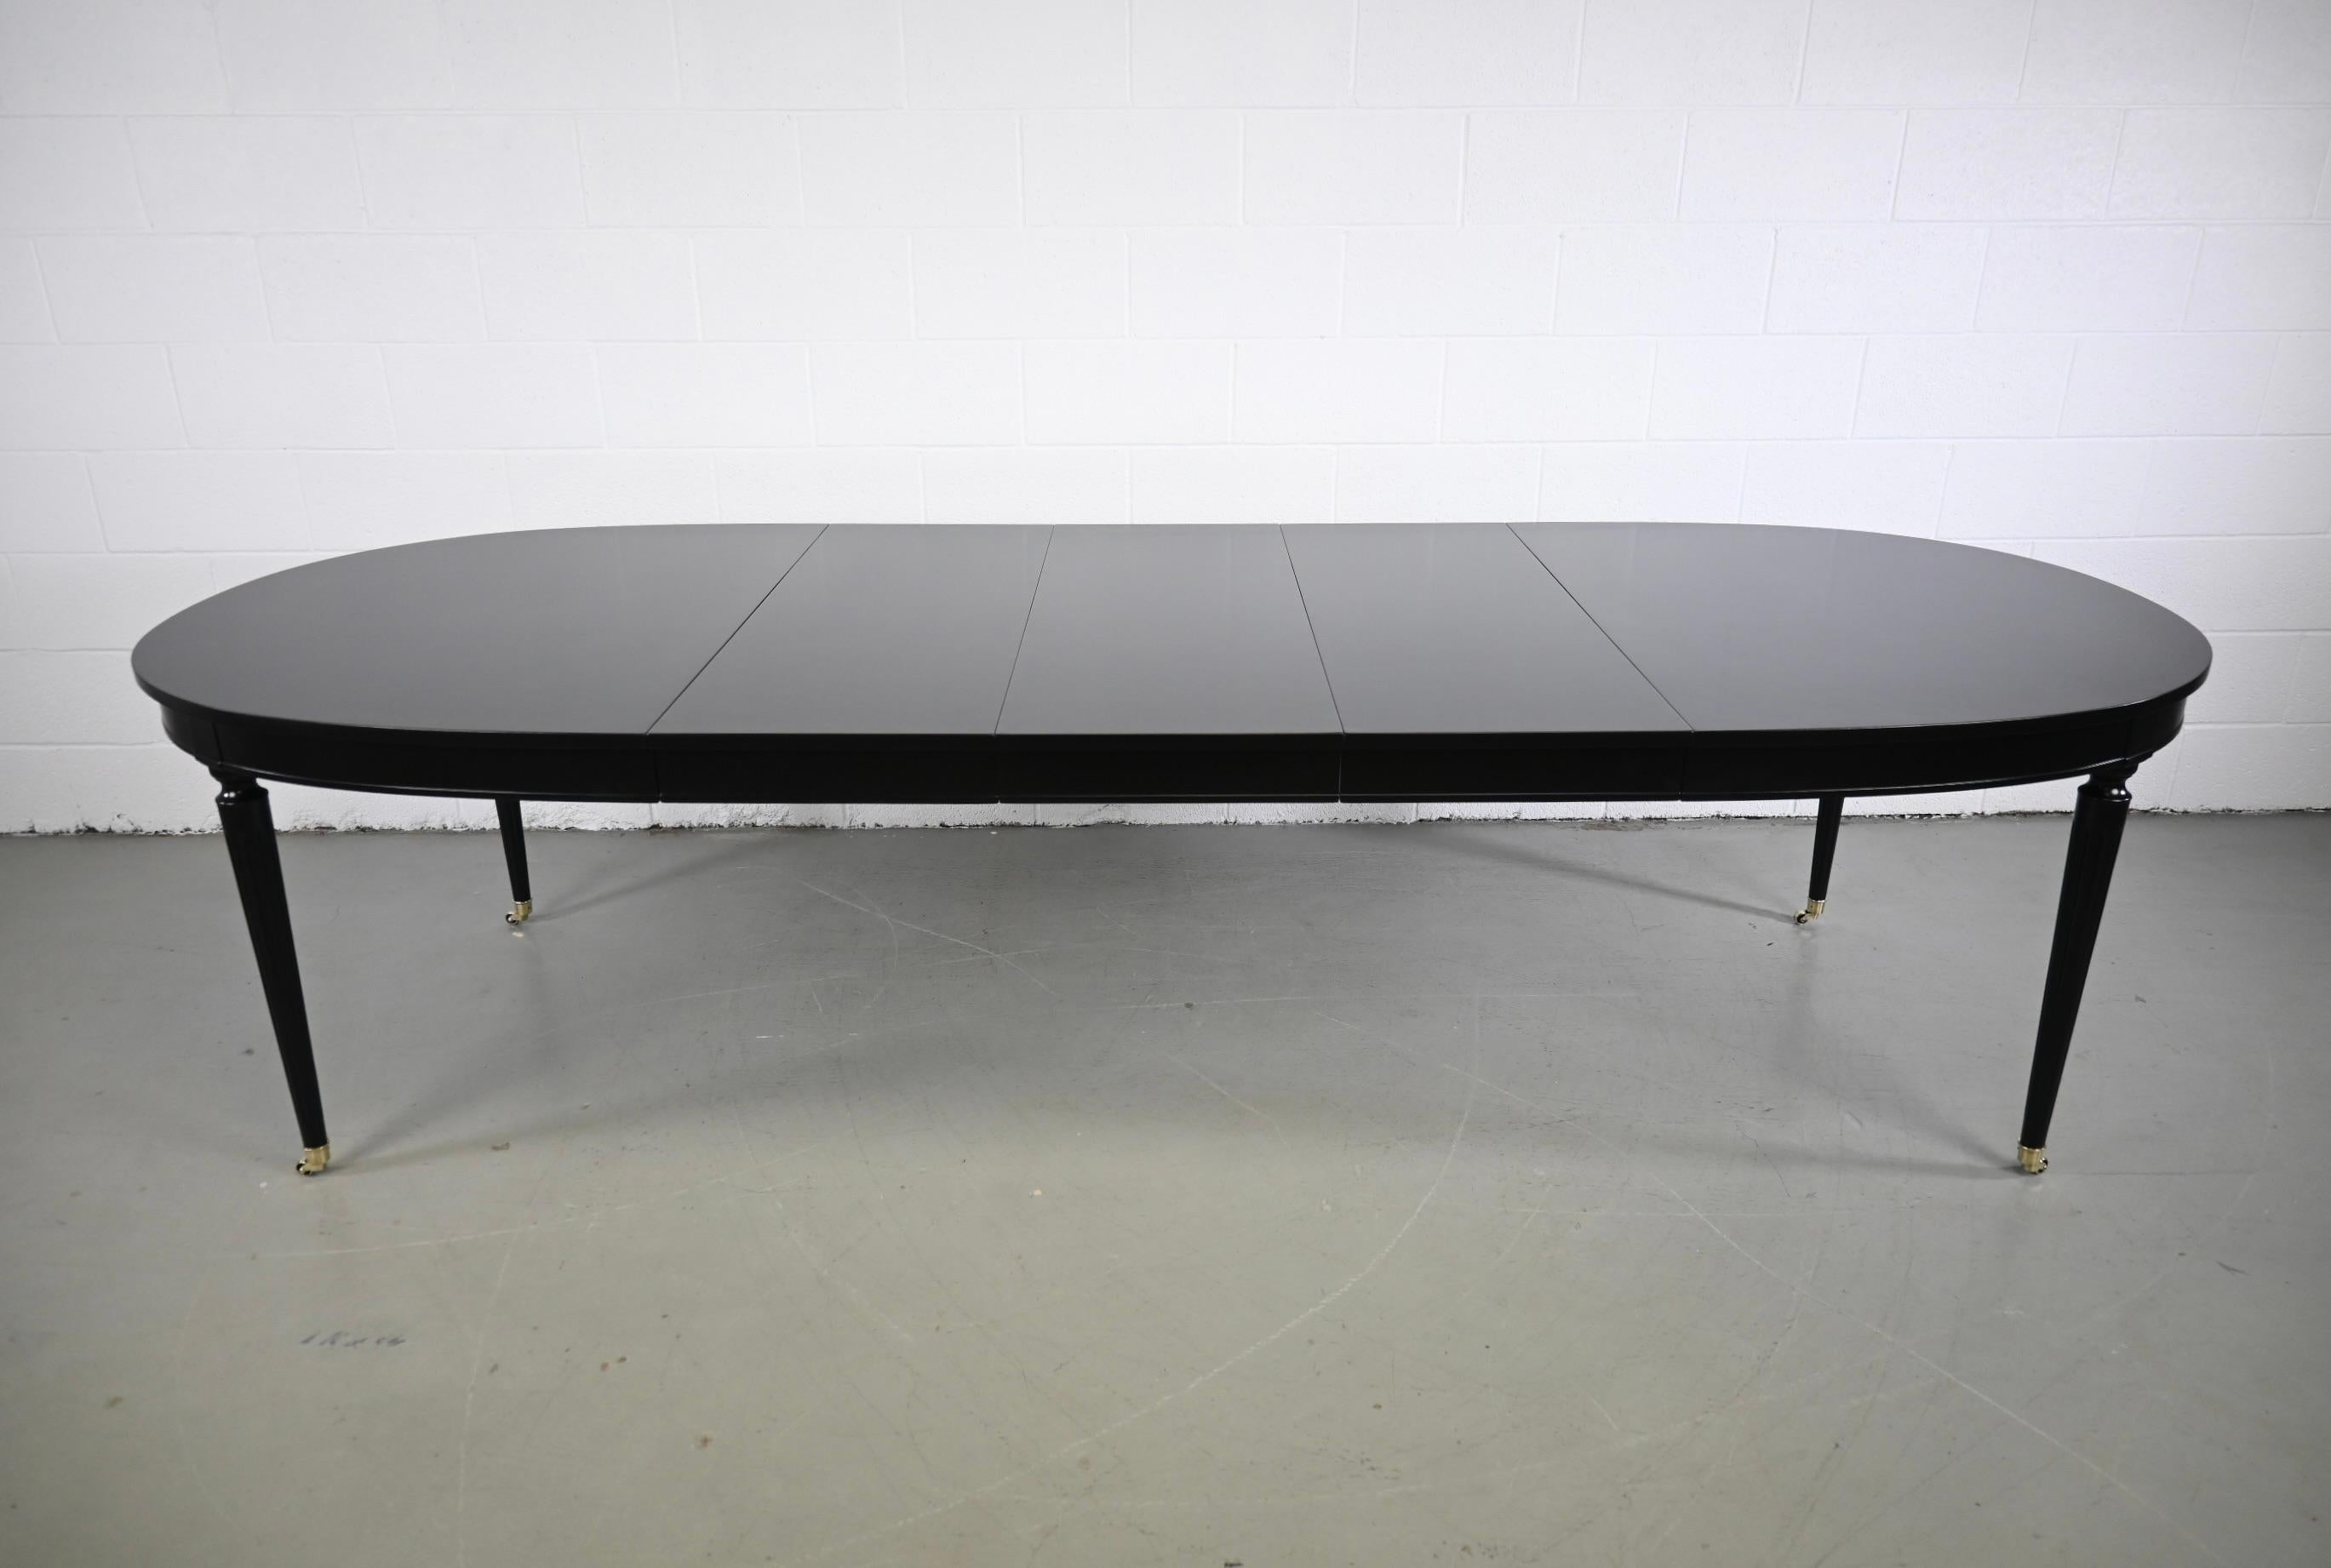 Kindel Furniture Black Lacquered French Regency Style Extension Dining Table

Kindel Furniture, USA, 1970s

65.75 Wide x 44 Deep x 29 High. Table extends up to 113.75